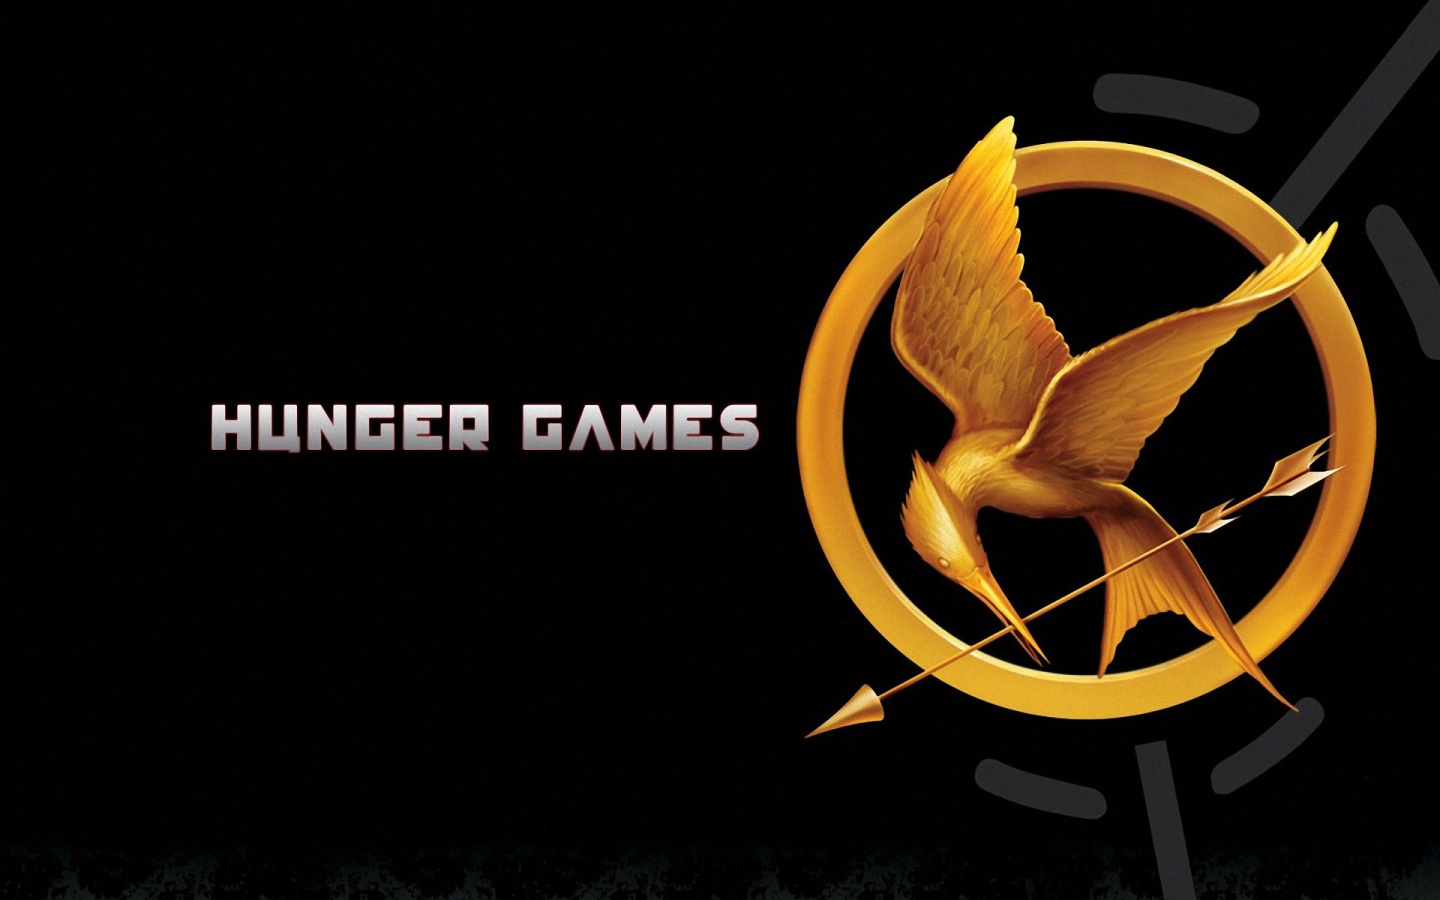 1440x900 The Hunger Games Poster desktop PC and Mac wallpaper